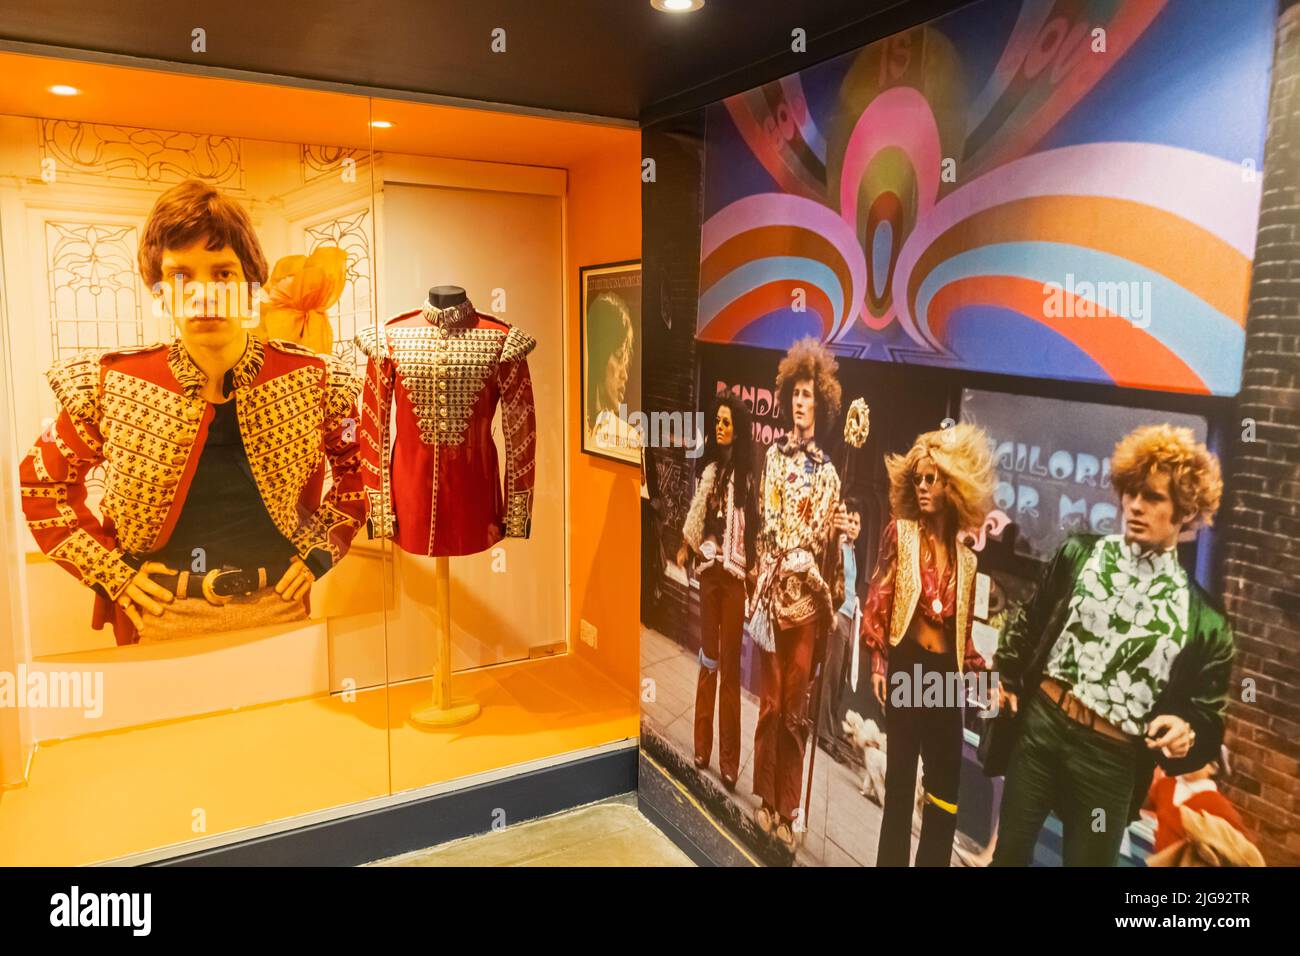 England, London, Southwark, Bermondsey, The Fashion and Textile Museum, Exhibit of 1960's Jacket worn by Mick Jagger of The Rolling Stones and Photograph of Group Wearing 1960's Fashion Stock Photo